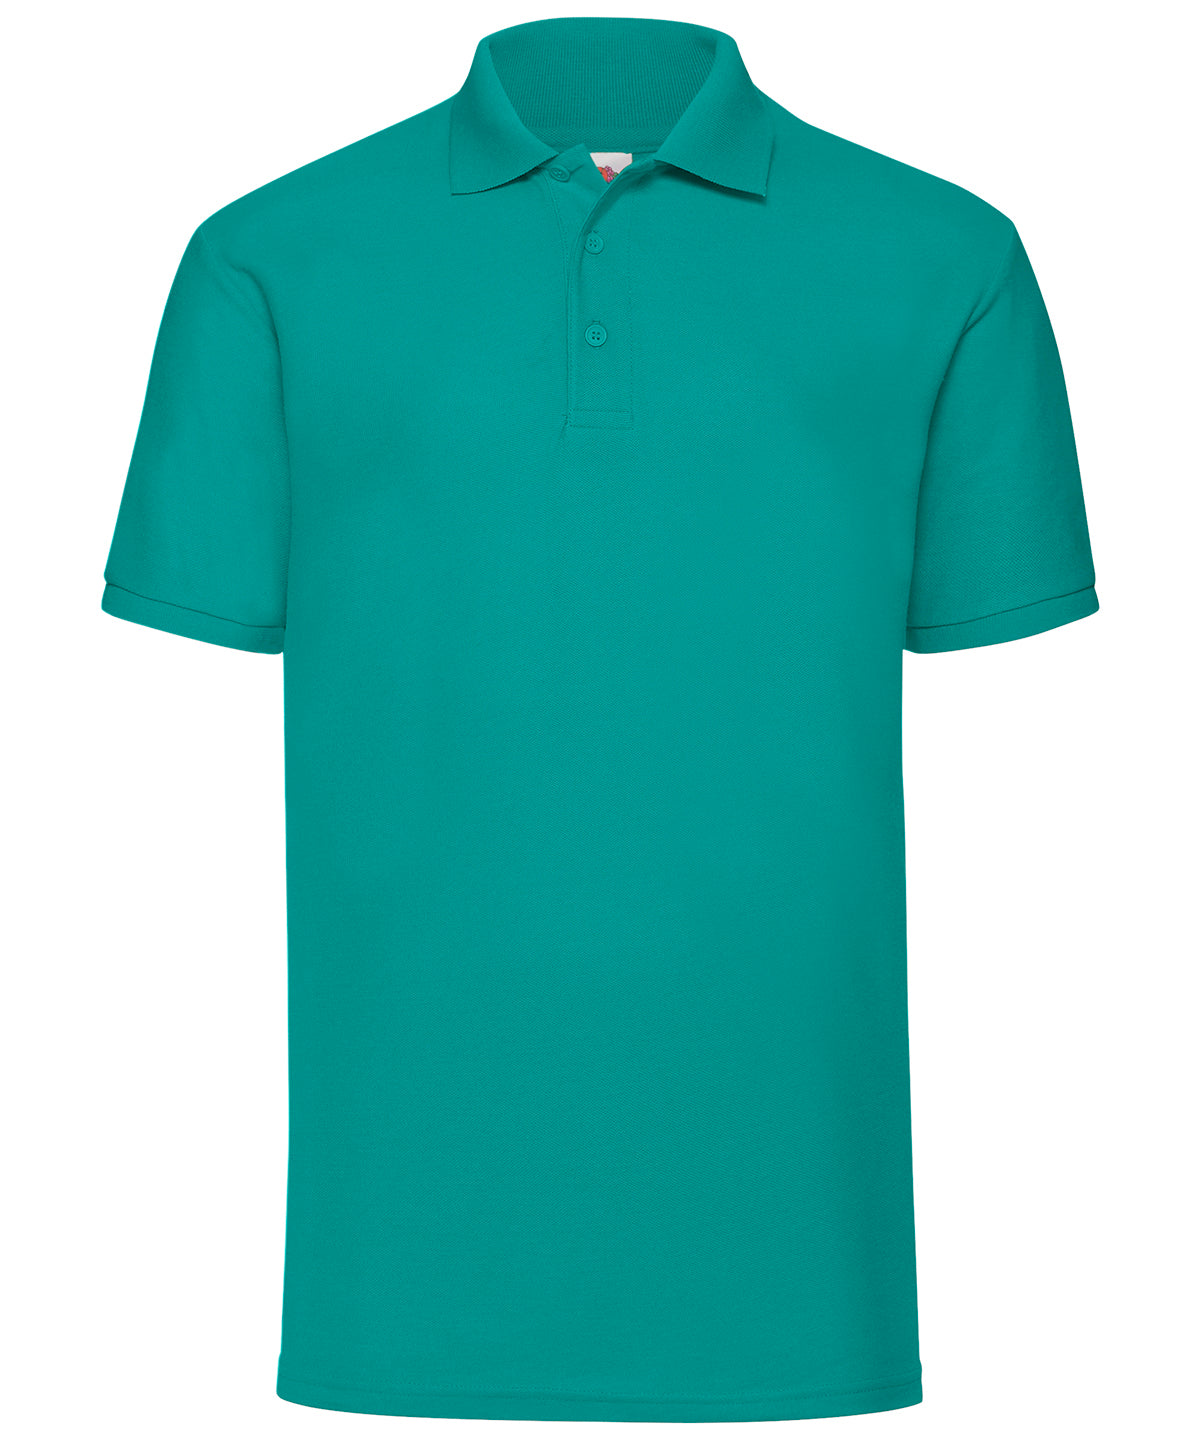 Personalised Polo Shirts - Royal Fruit of the Loom 65/35 Polo